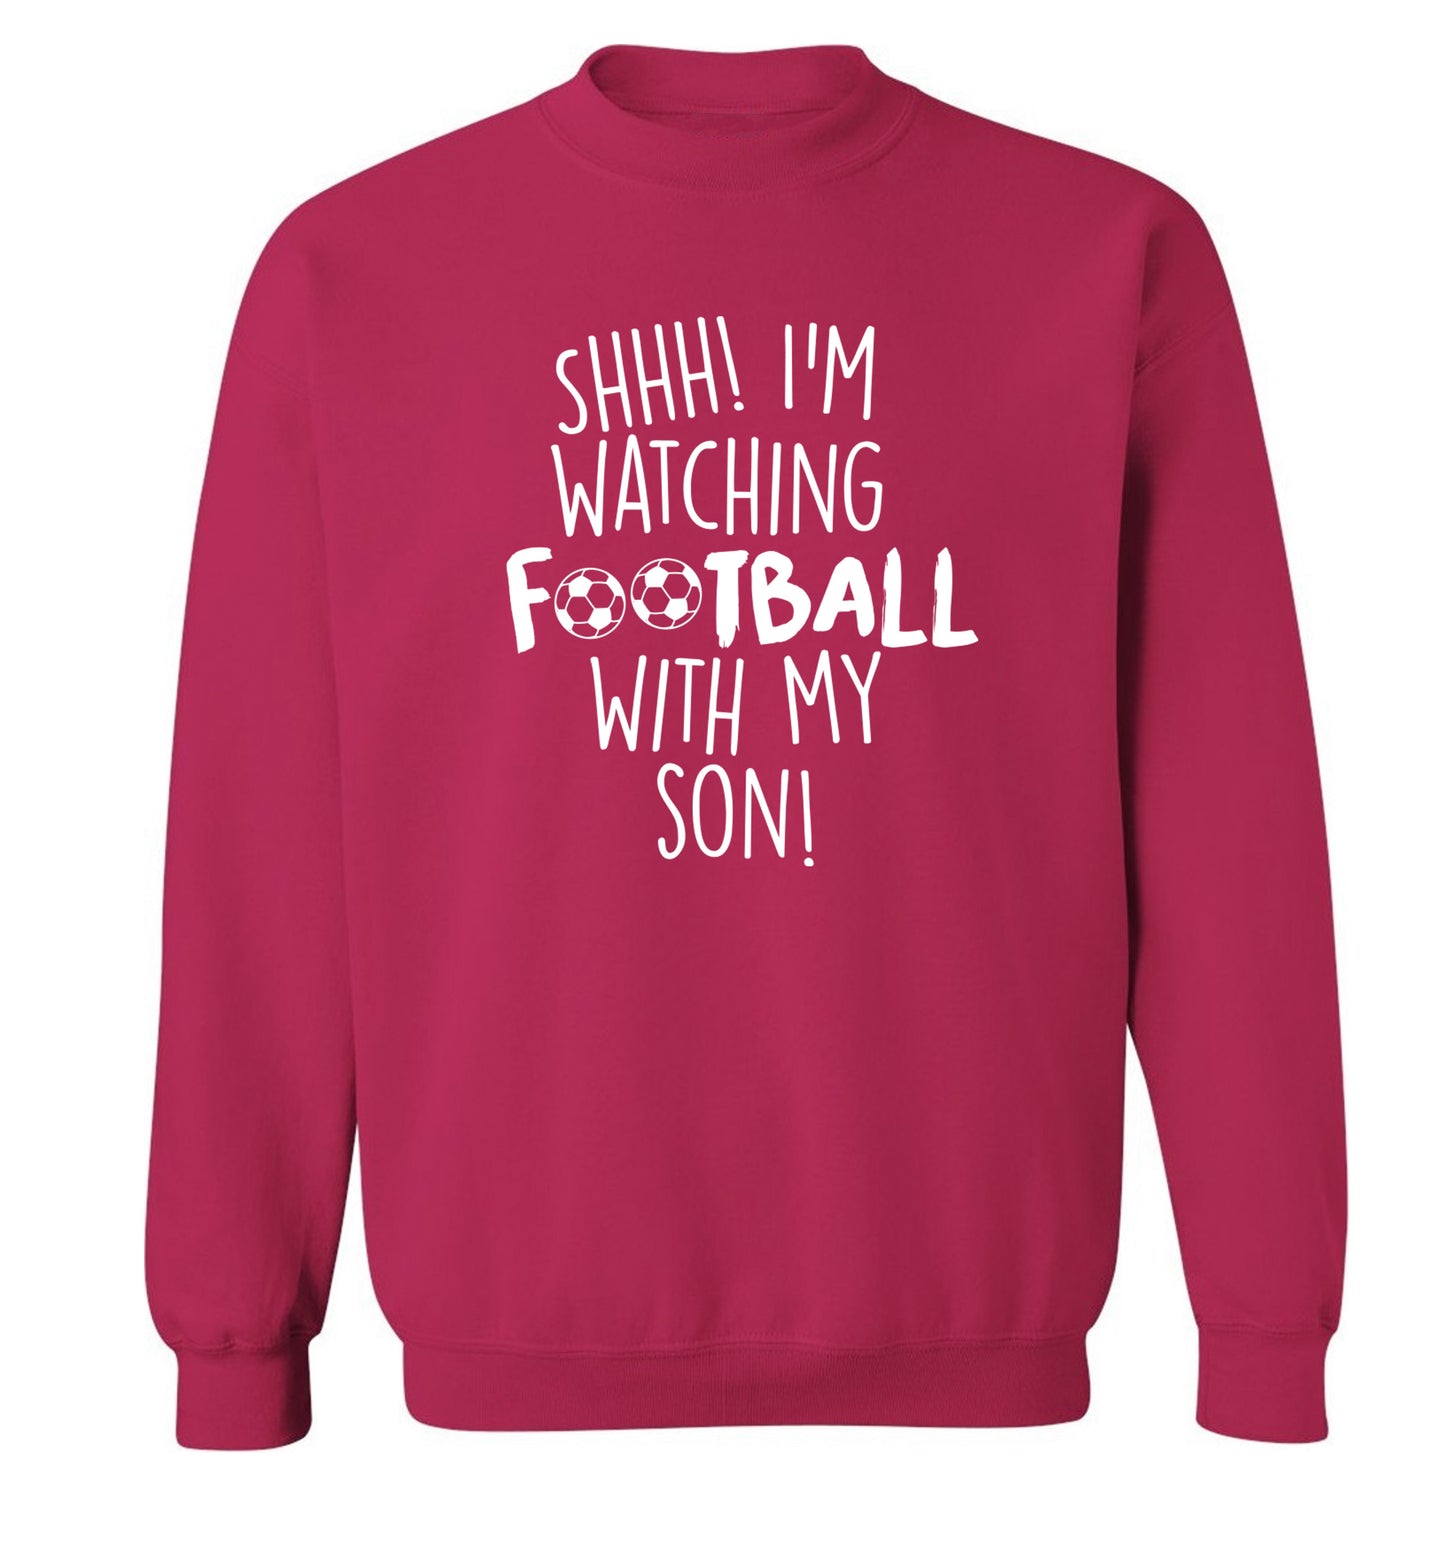 Shhh I'm watching football with my son Adult's unisexpink Sweater 2XL